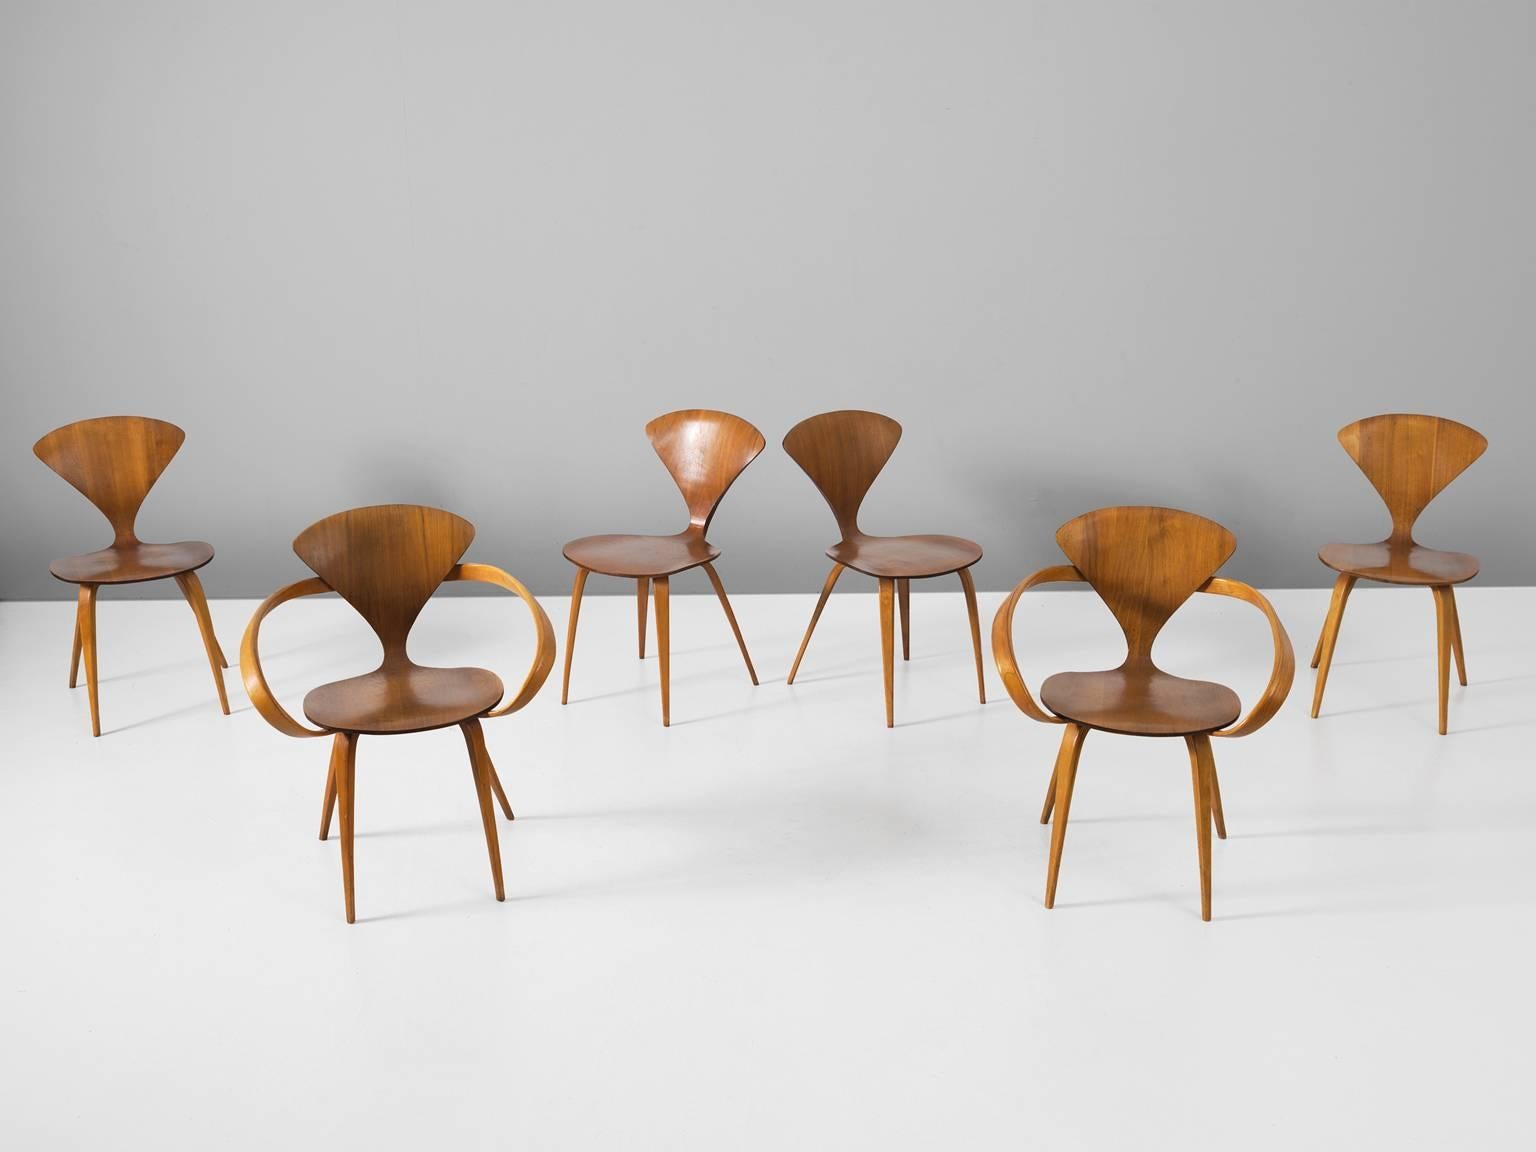 Set of six dining chairs, in walnut and plywood, by Norman Cherner for Plycraft, United States 1957. 

On offer are two Classic Norman Cherner plywood chairs with and four without armrests from 1957. The perfect combination. Their iconic shape